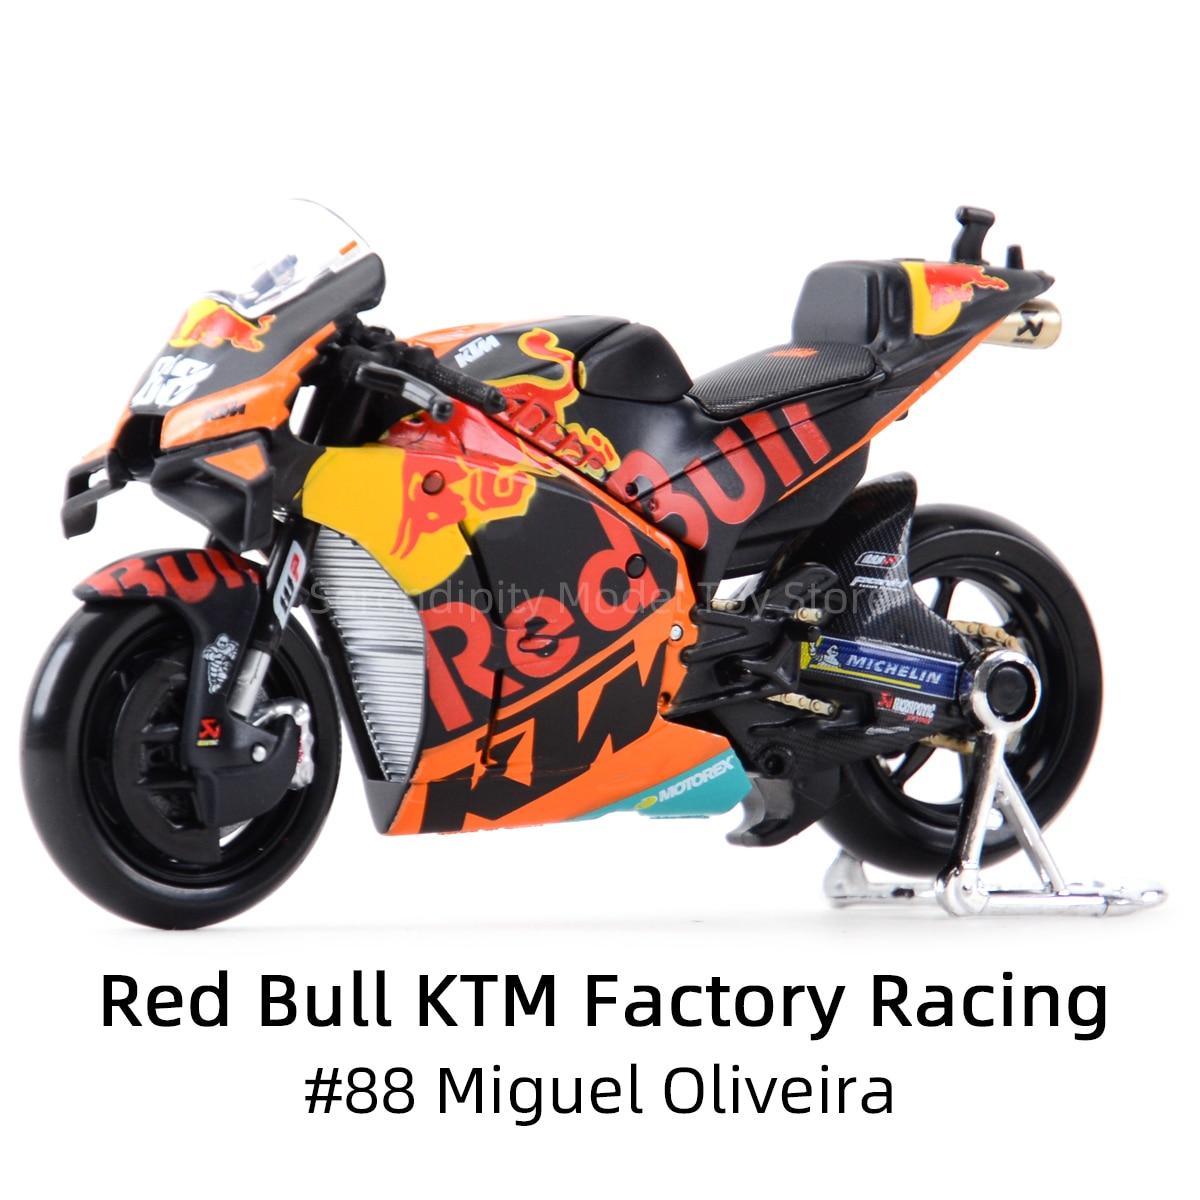 Maisto-1-18-2021-GP-Racing-Red-Bull-KTM-Factory-Racing-Die-Cast-Vehicles-Collectible-Motorcycle.jpg